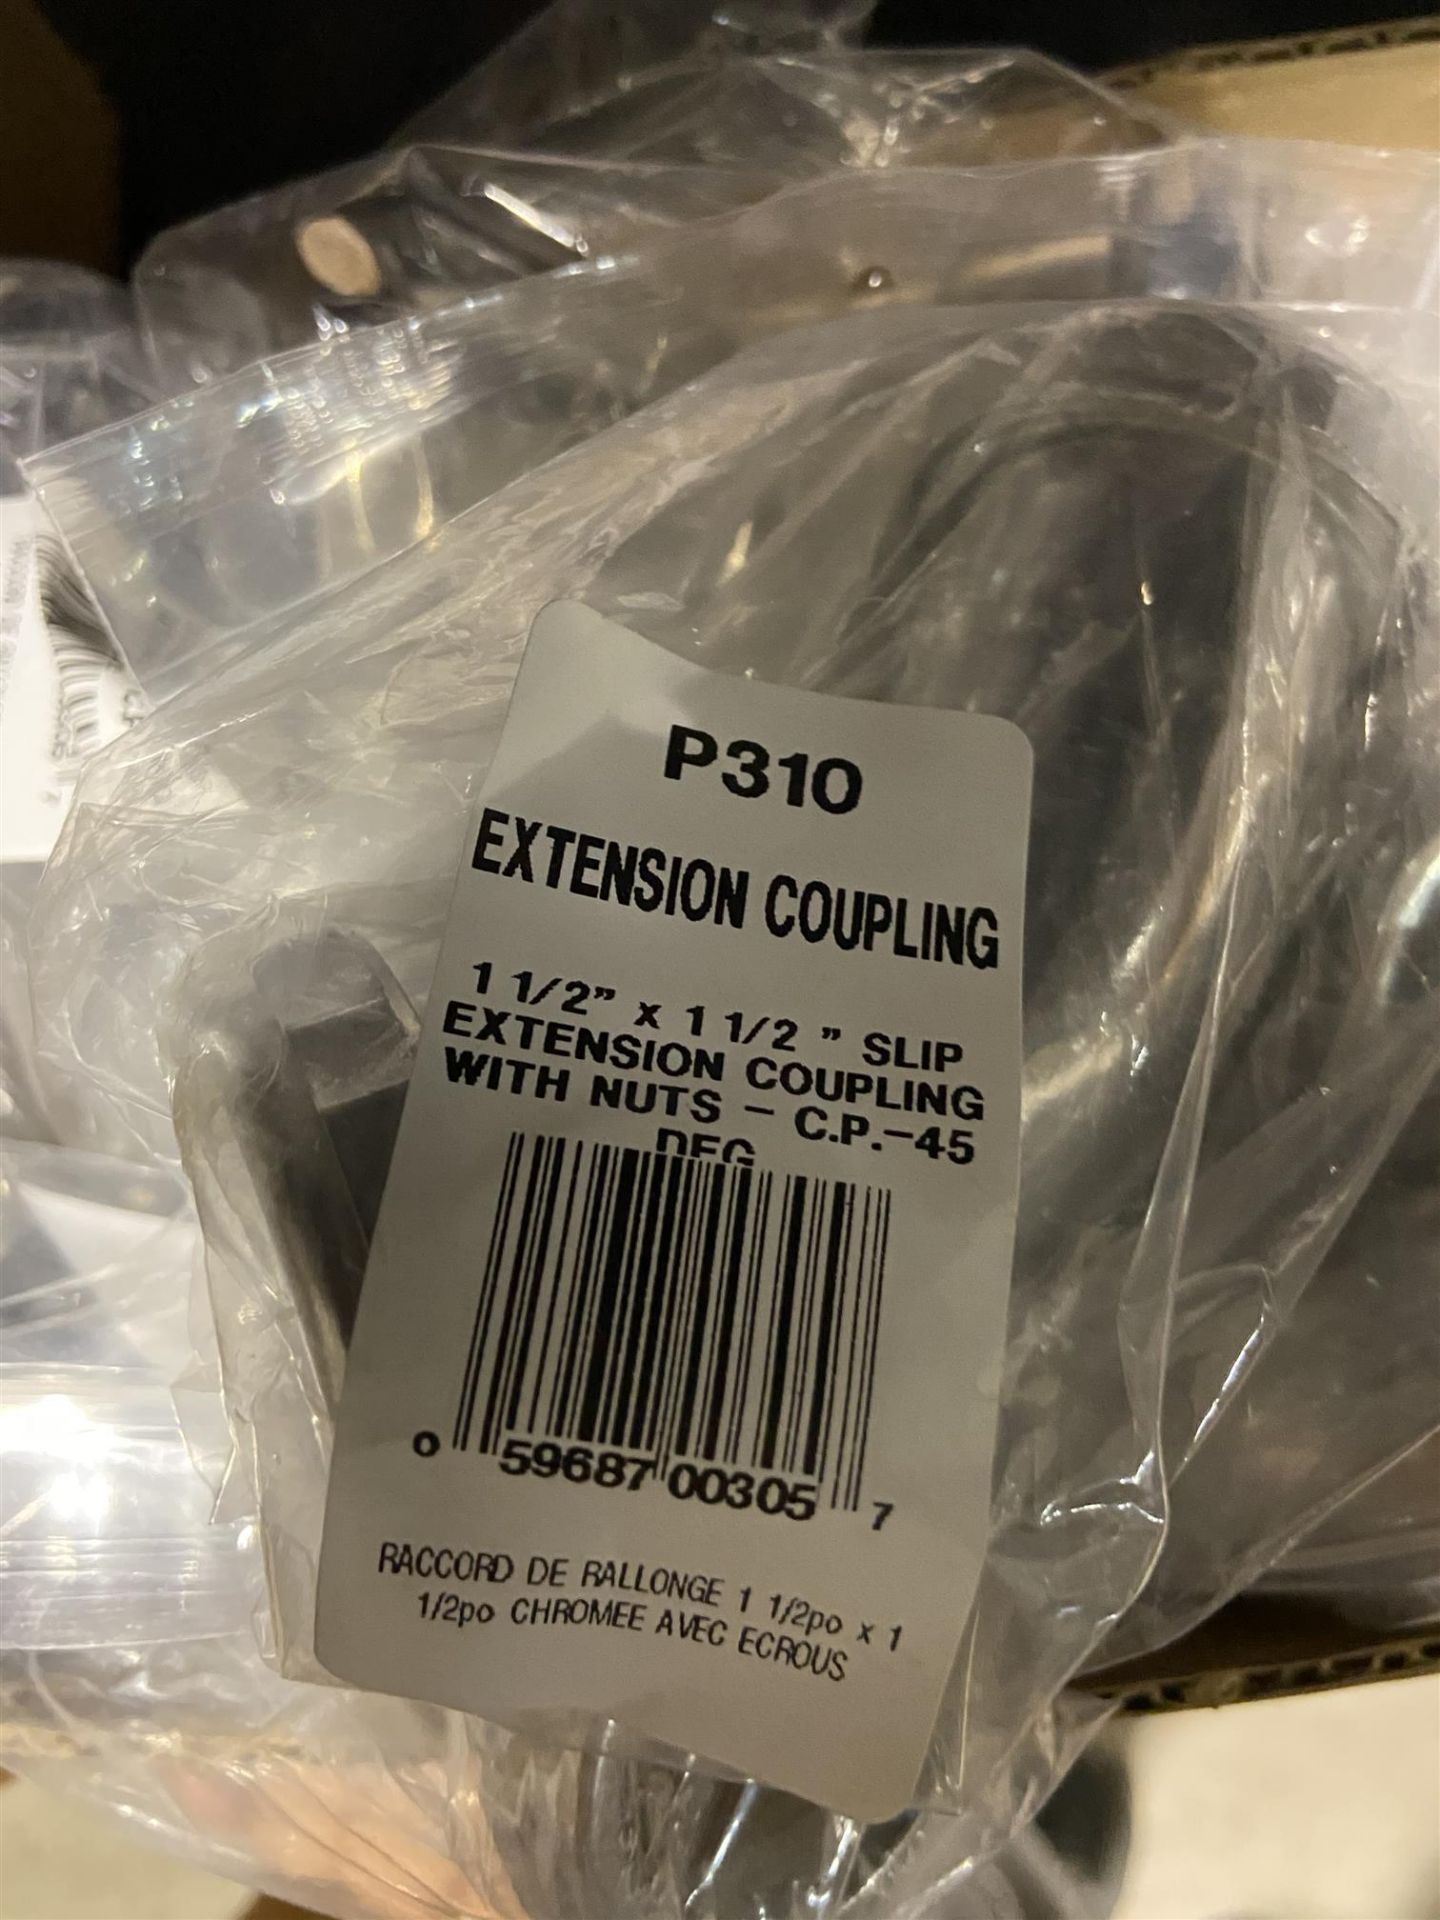 P310 - EXTENSION COUPLING - EXTENSION COUPLING W/NUTS - 28PCS - Image 2 of 4